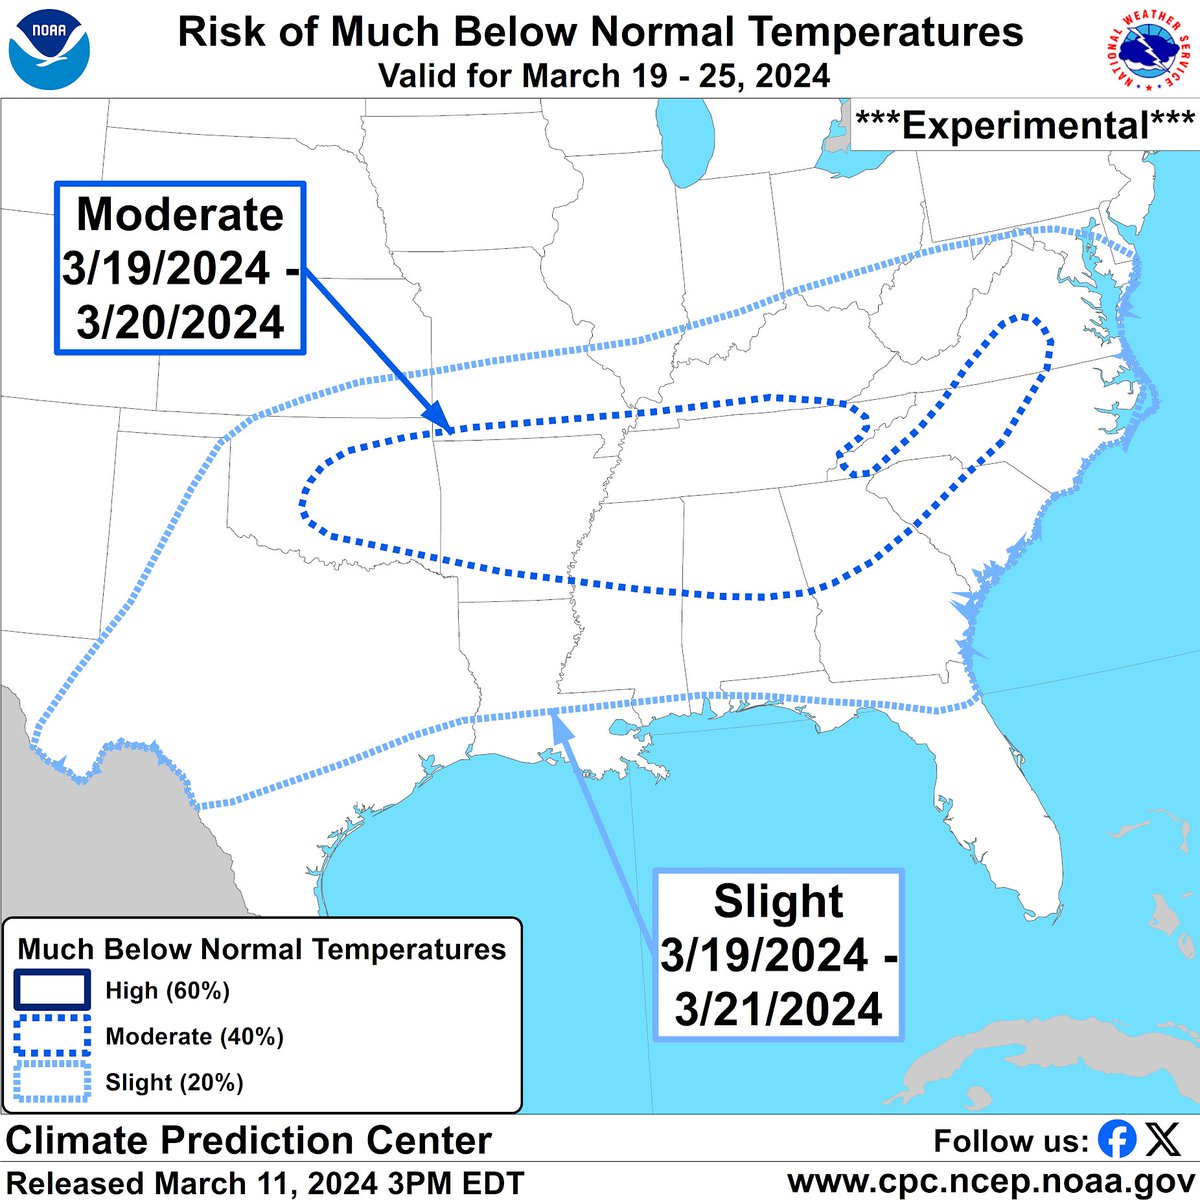 A moderate risk of much below normal temperatures may support freezing temperatures across parts of the southeastern CONUS next week, potentially impacting vegetation due to early greening and anticipated antecedent warmer temperatures.